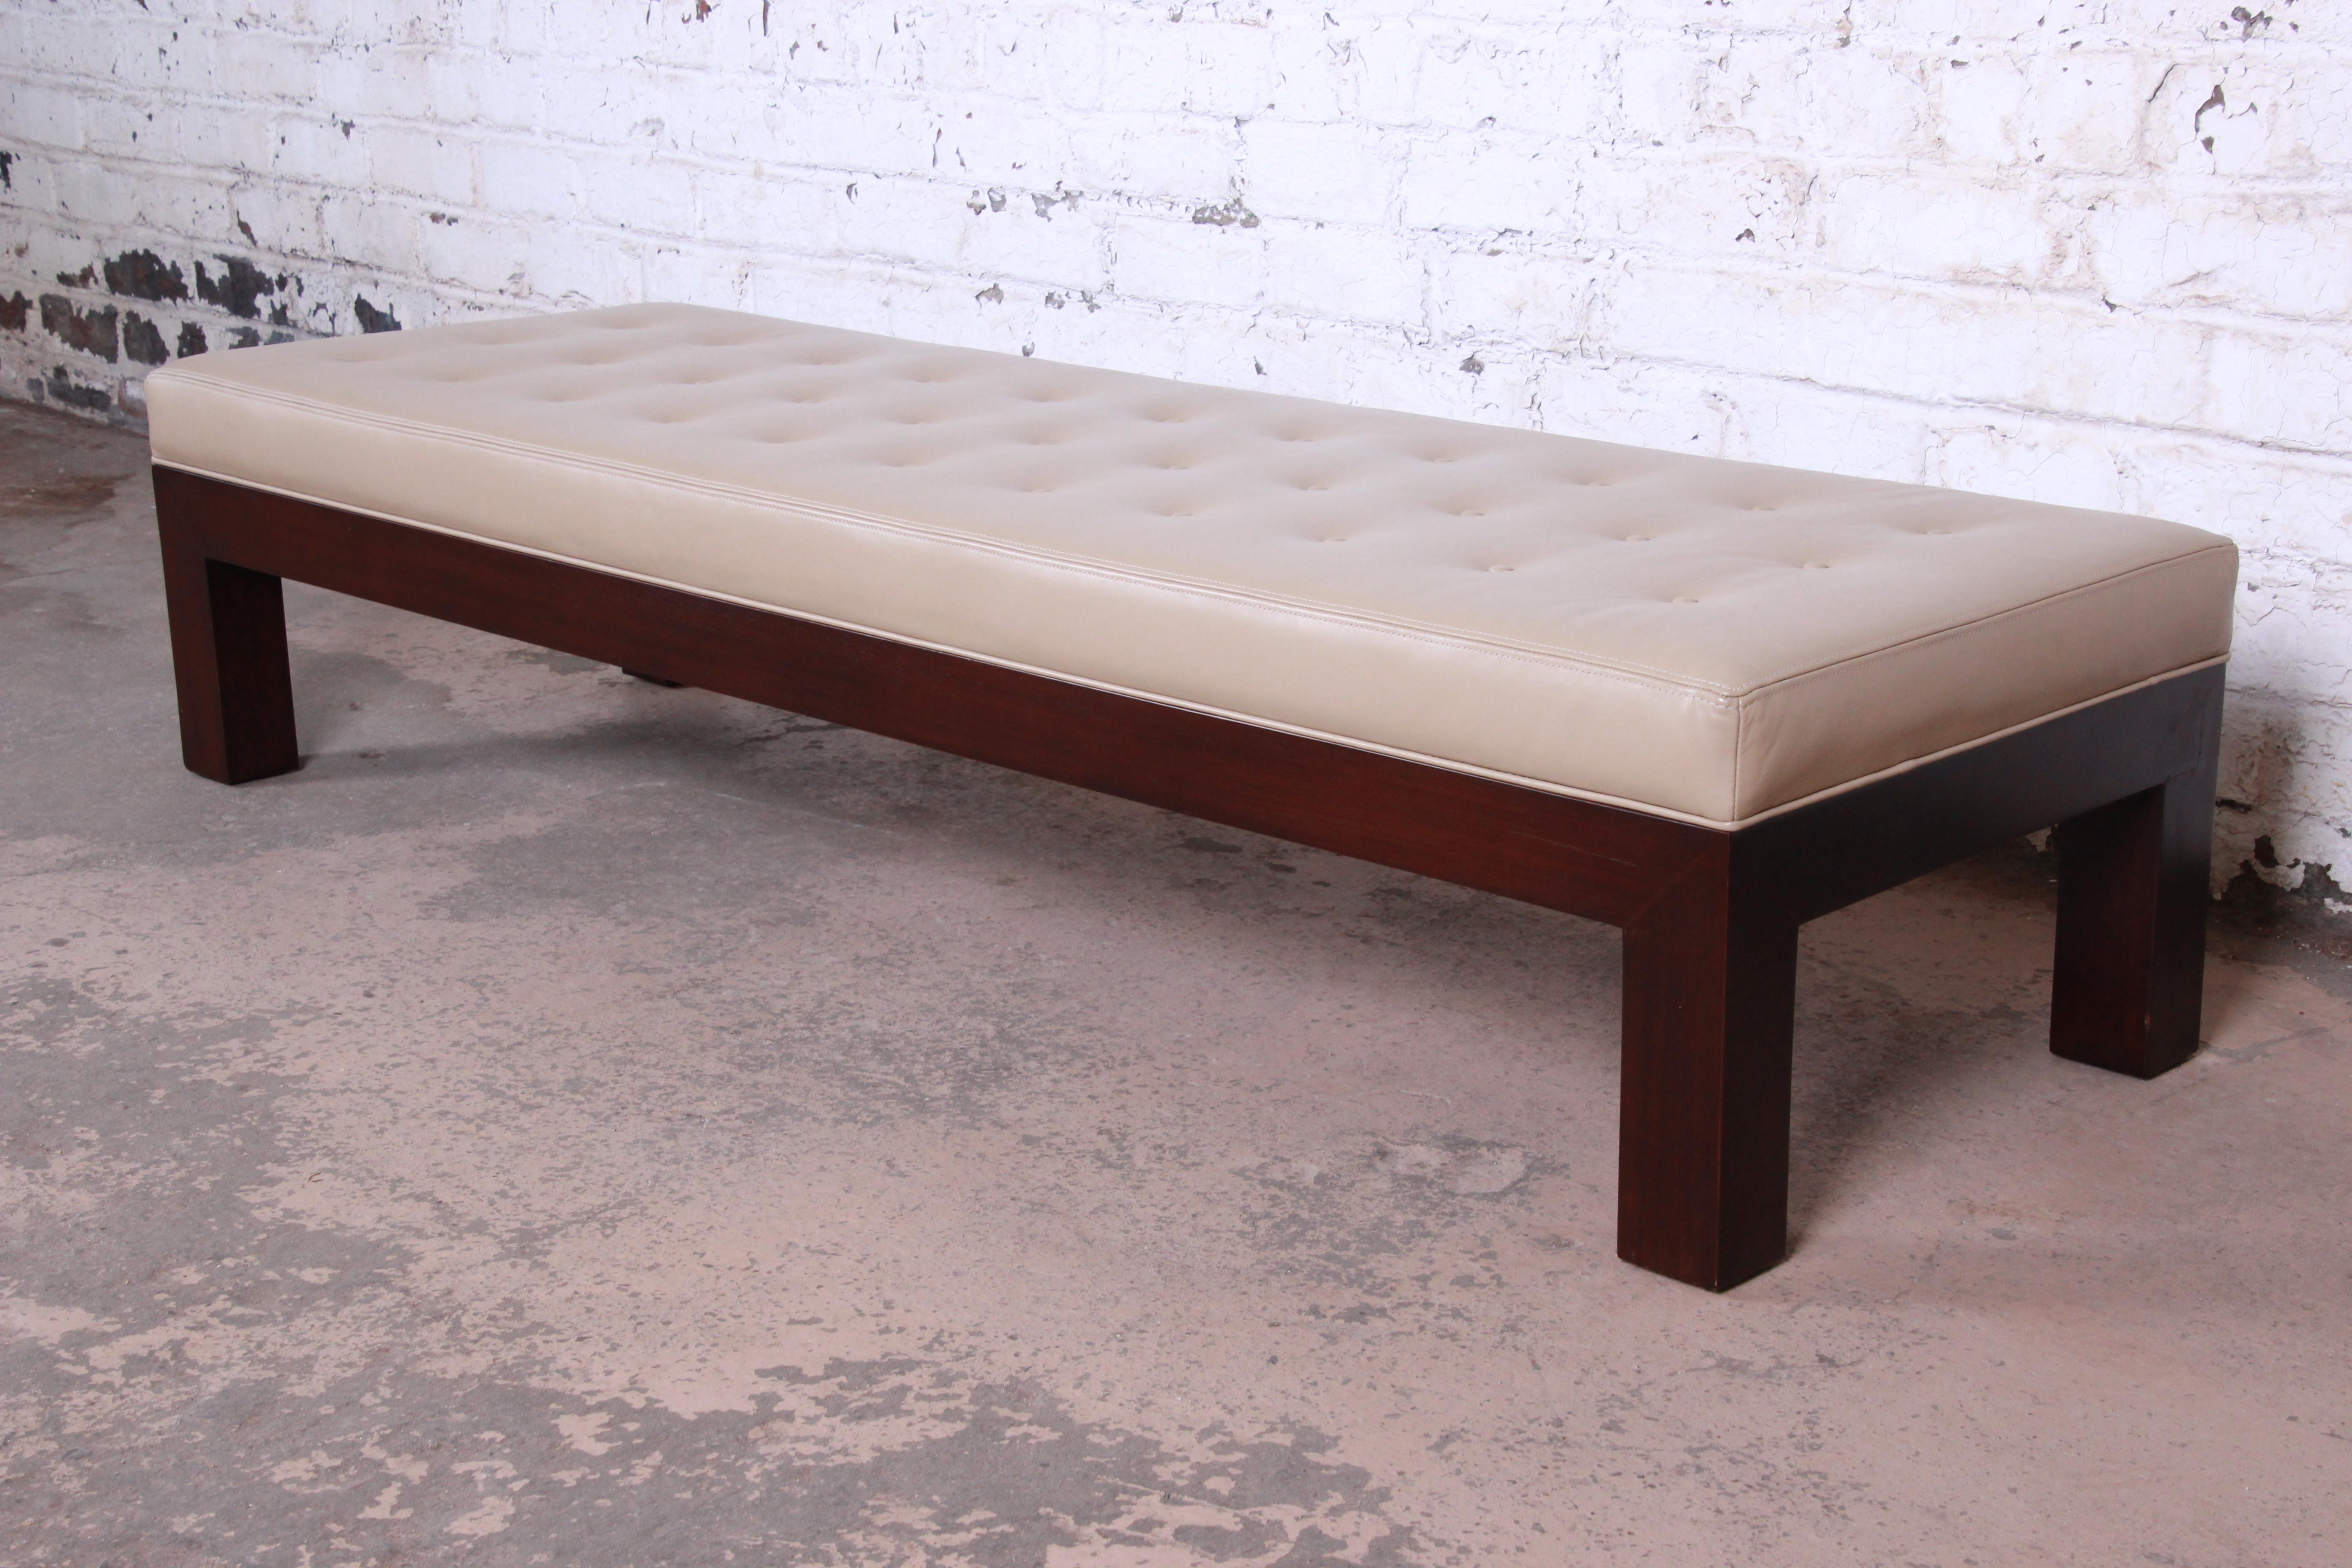 A rare and exceptional Mid-Century Modern Parsons bench designed by Michael Taylor for Baker Furniture. The bench features a gorgeous mahogany frame and legs and sleek, Minimalist mid-century design. Recently reupholstered in high-end tan aniline